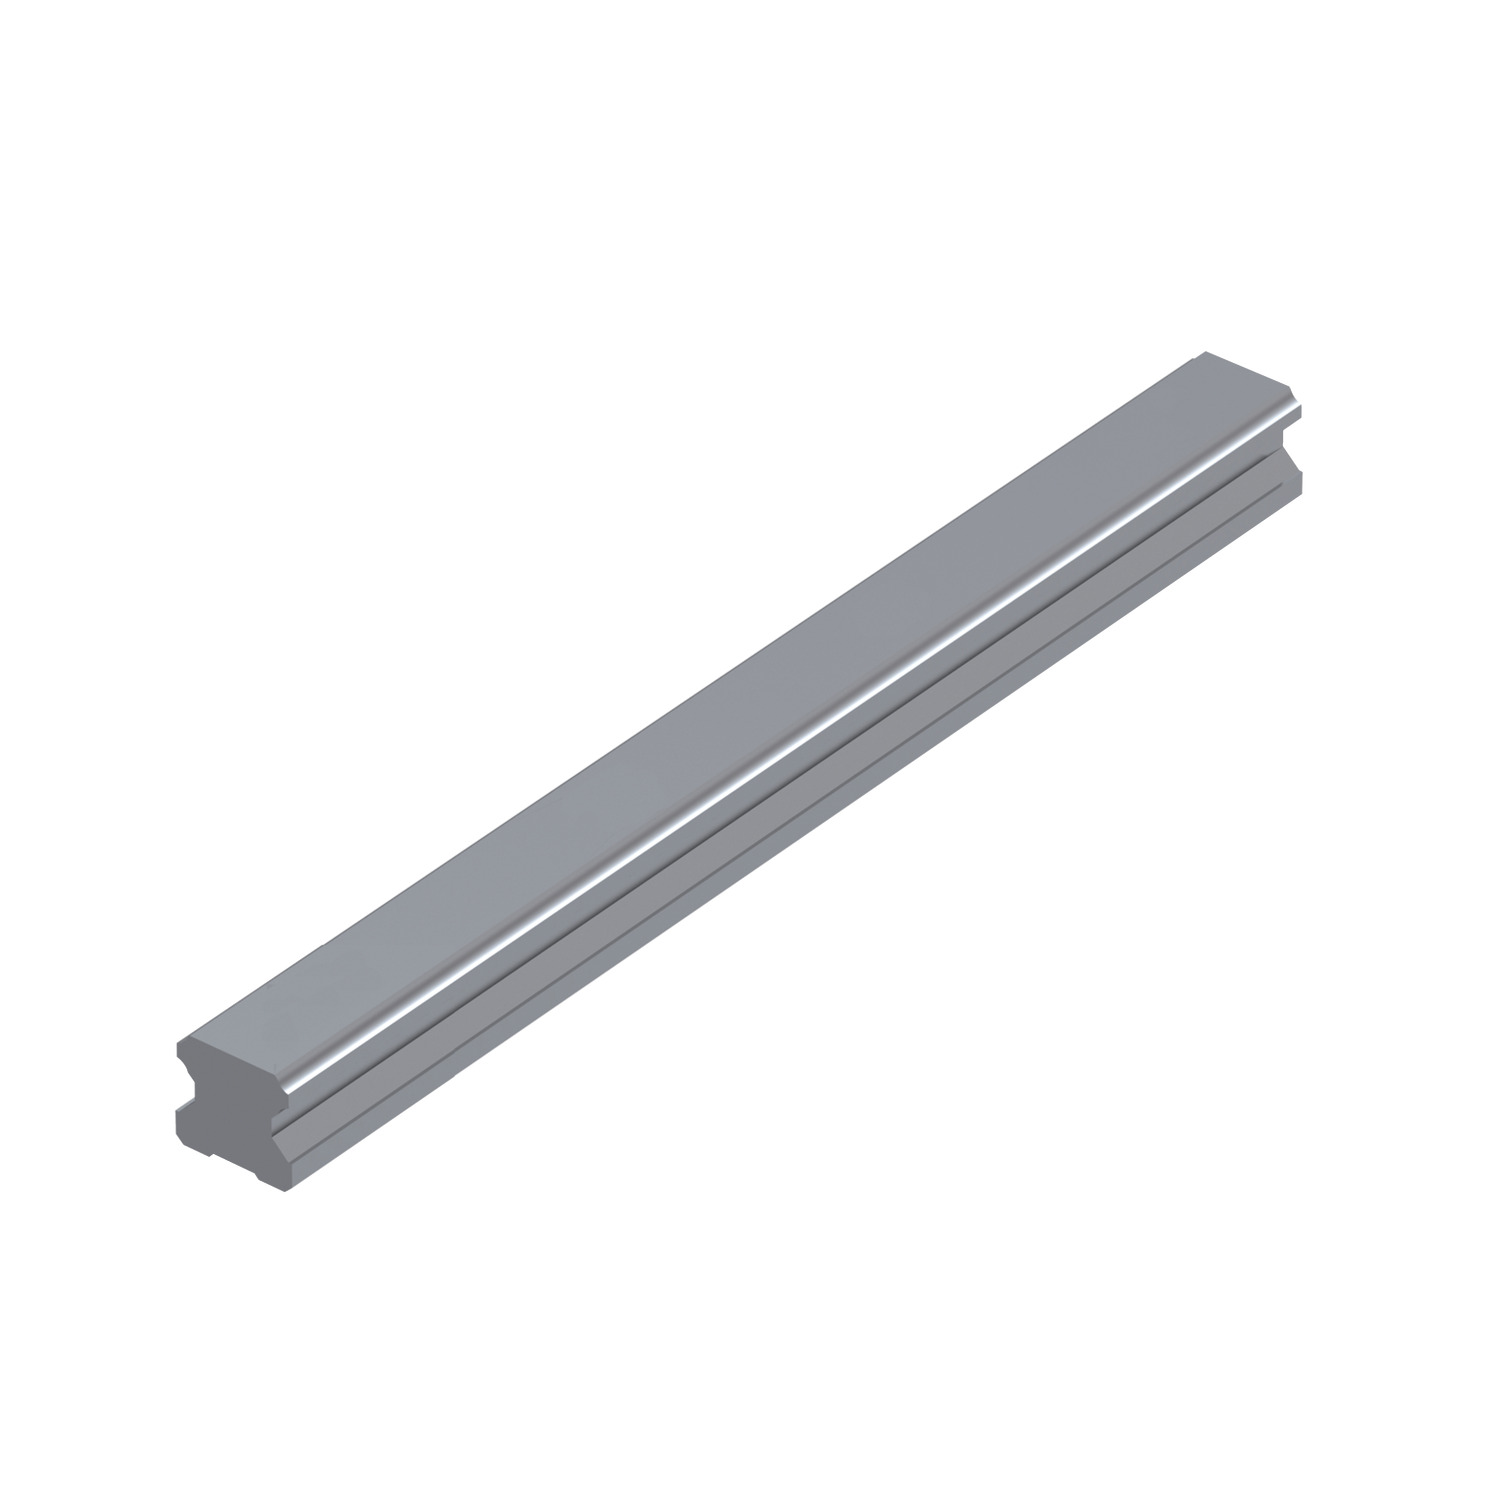 L1016.RF15-0460 Linear guide rail rear fixing 15mm 0460 Hardened and ground steel. EC:20166076 WG:05063055294720